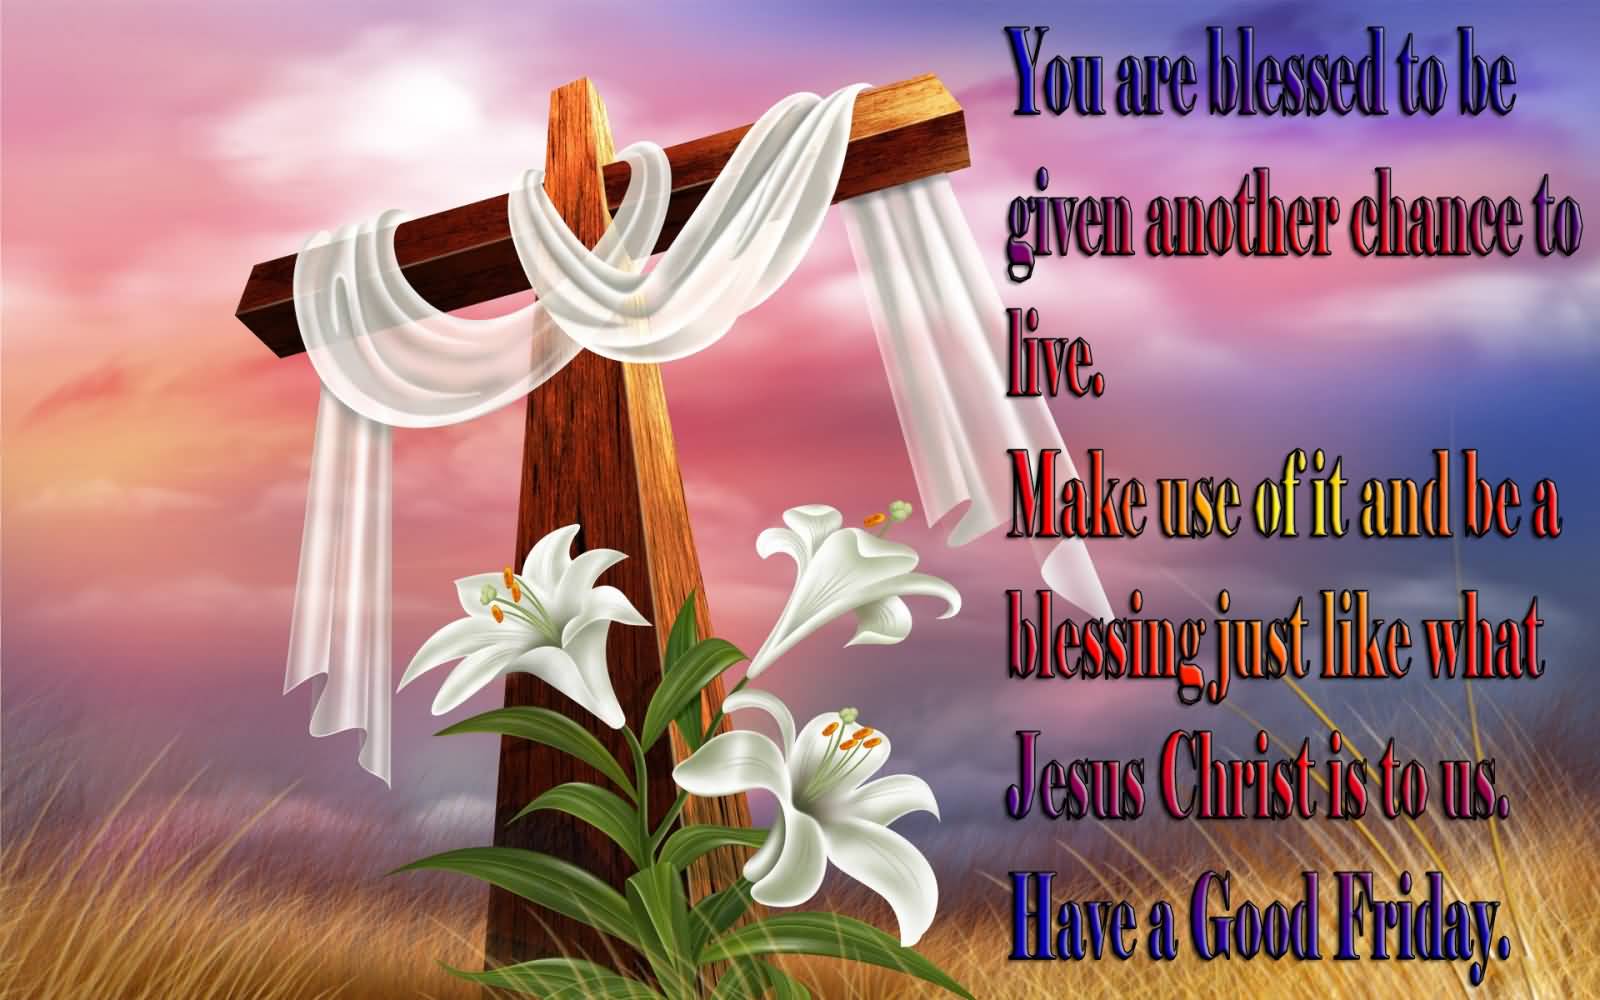 You Are Blessed To Be Given Another Chance To Live. Make Use Of It And Be A Blessing Just Like What Jesus Christ Is To Us. Have A Good Friday